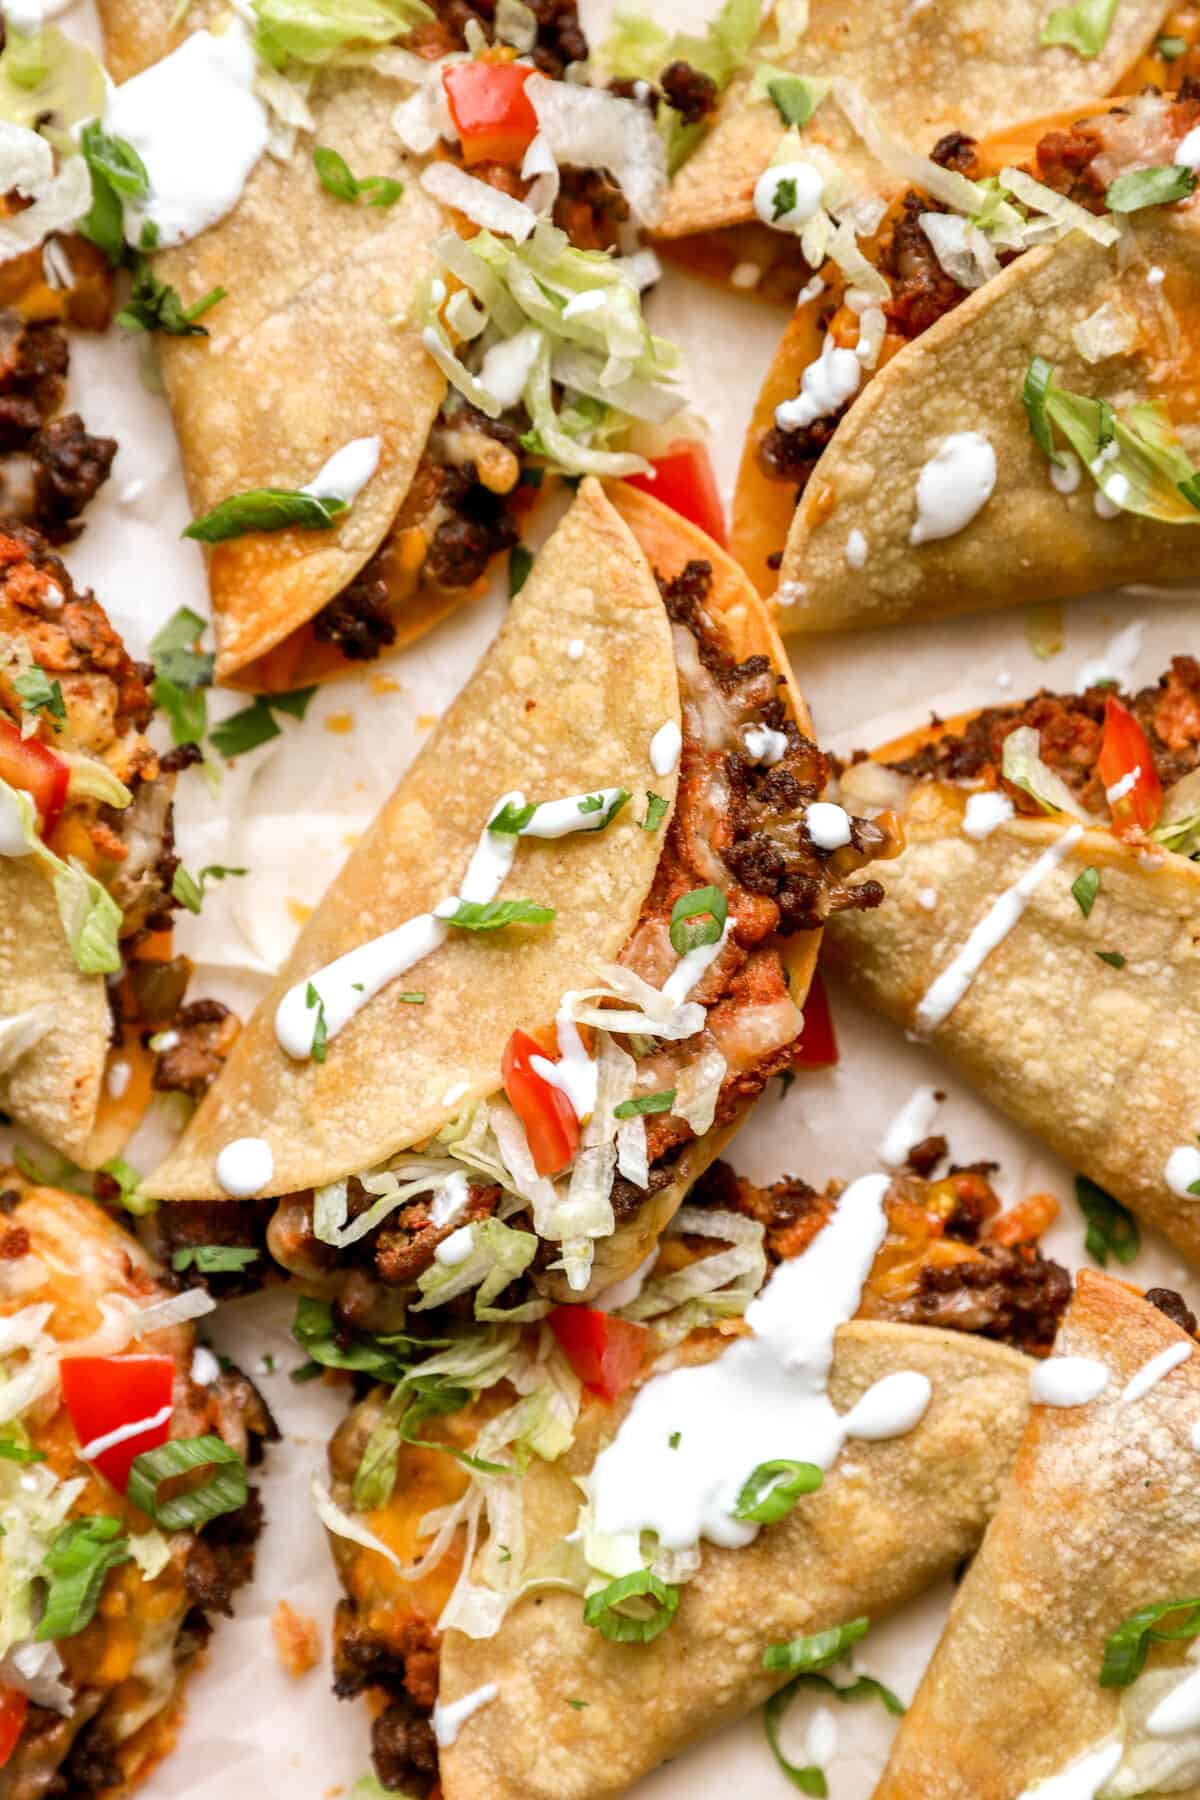 closeup of assembled ground beef tacos decorated with toppings.